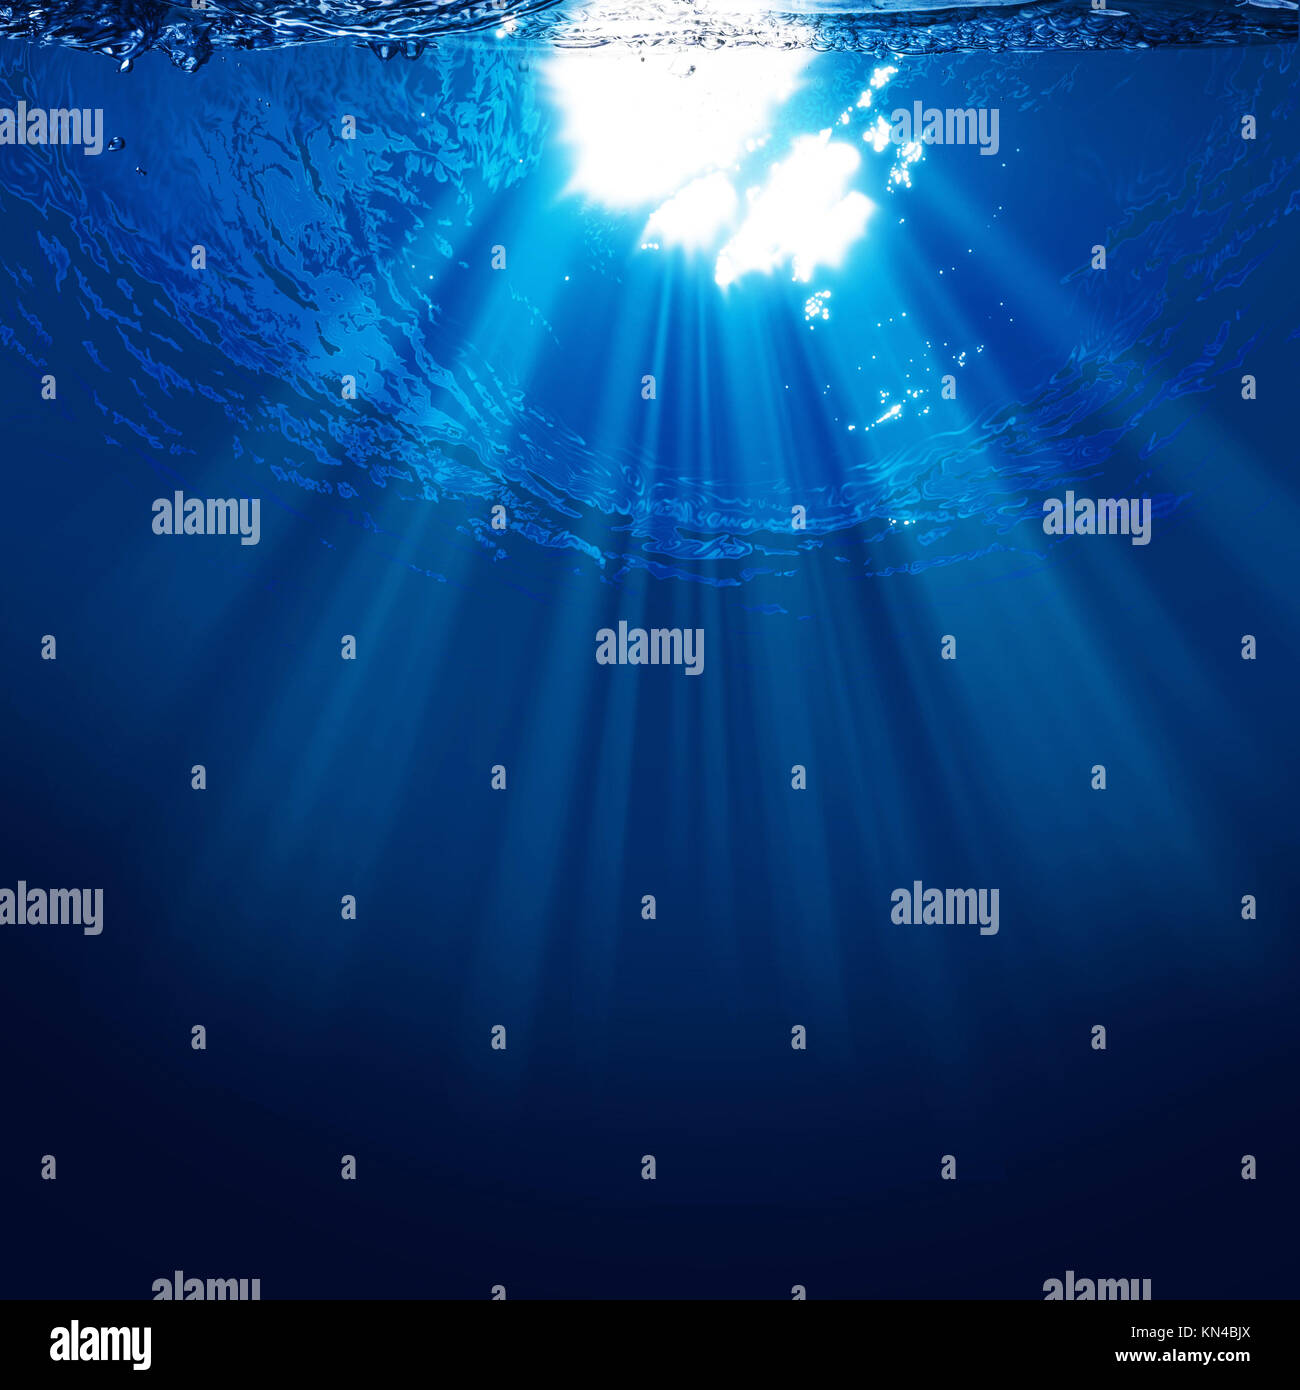 Abyss, abstract underwater backgrounds with sun beam. Stock Photo